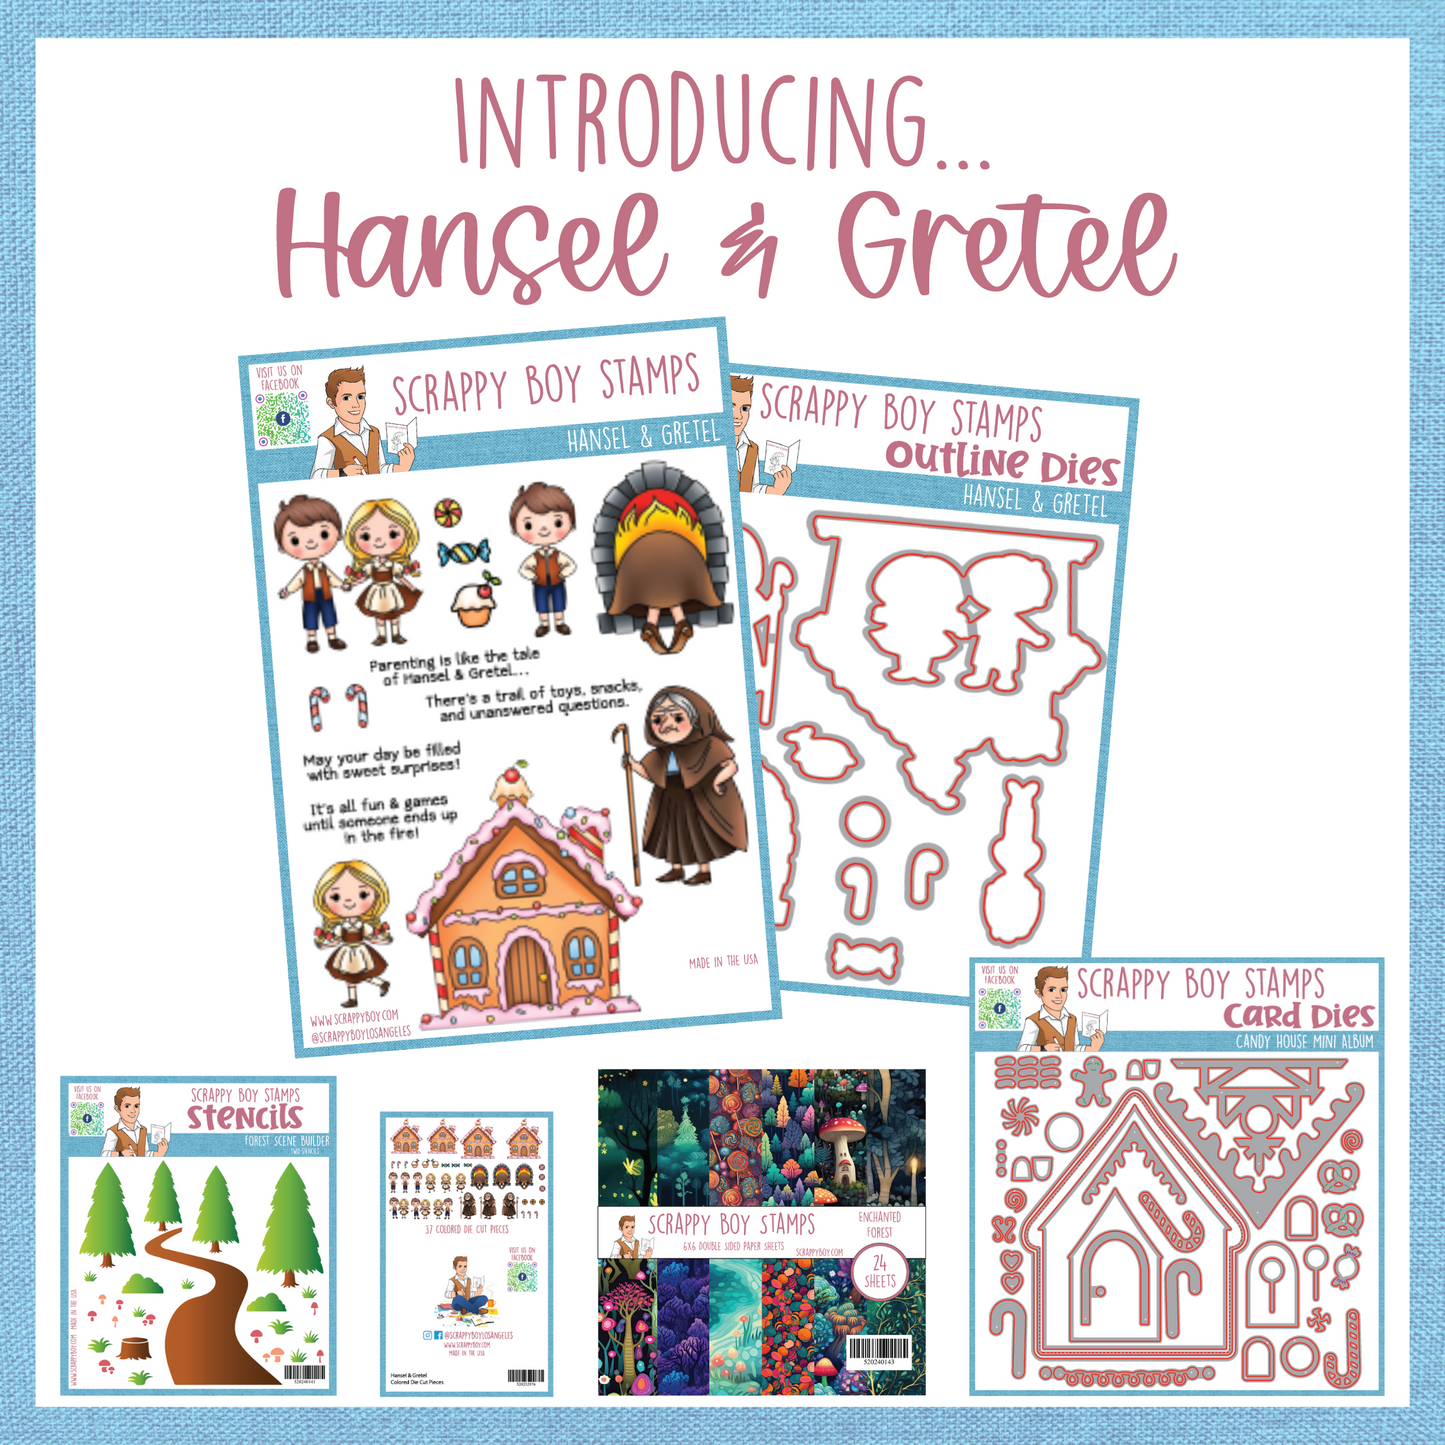 Hansel & Gretel themed stamps papers and stencils